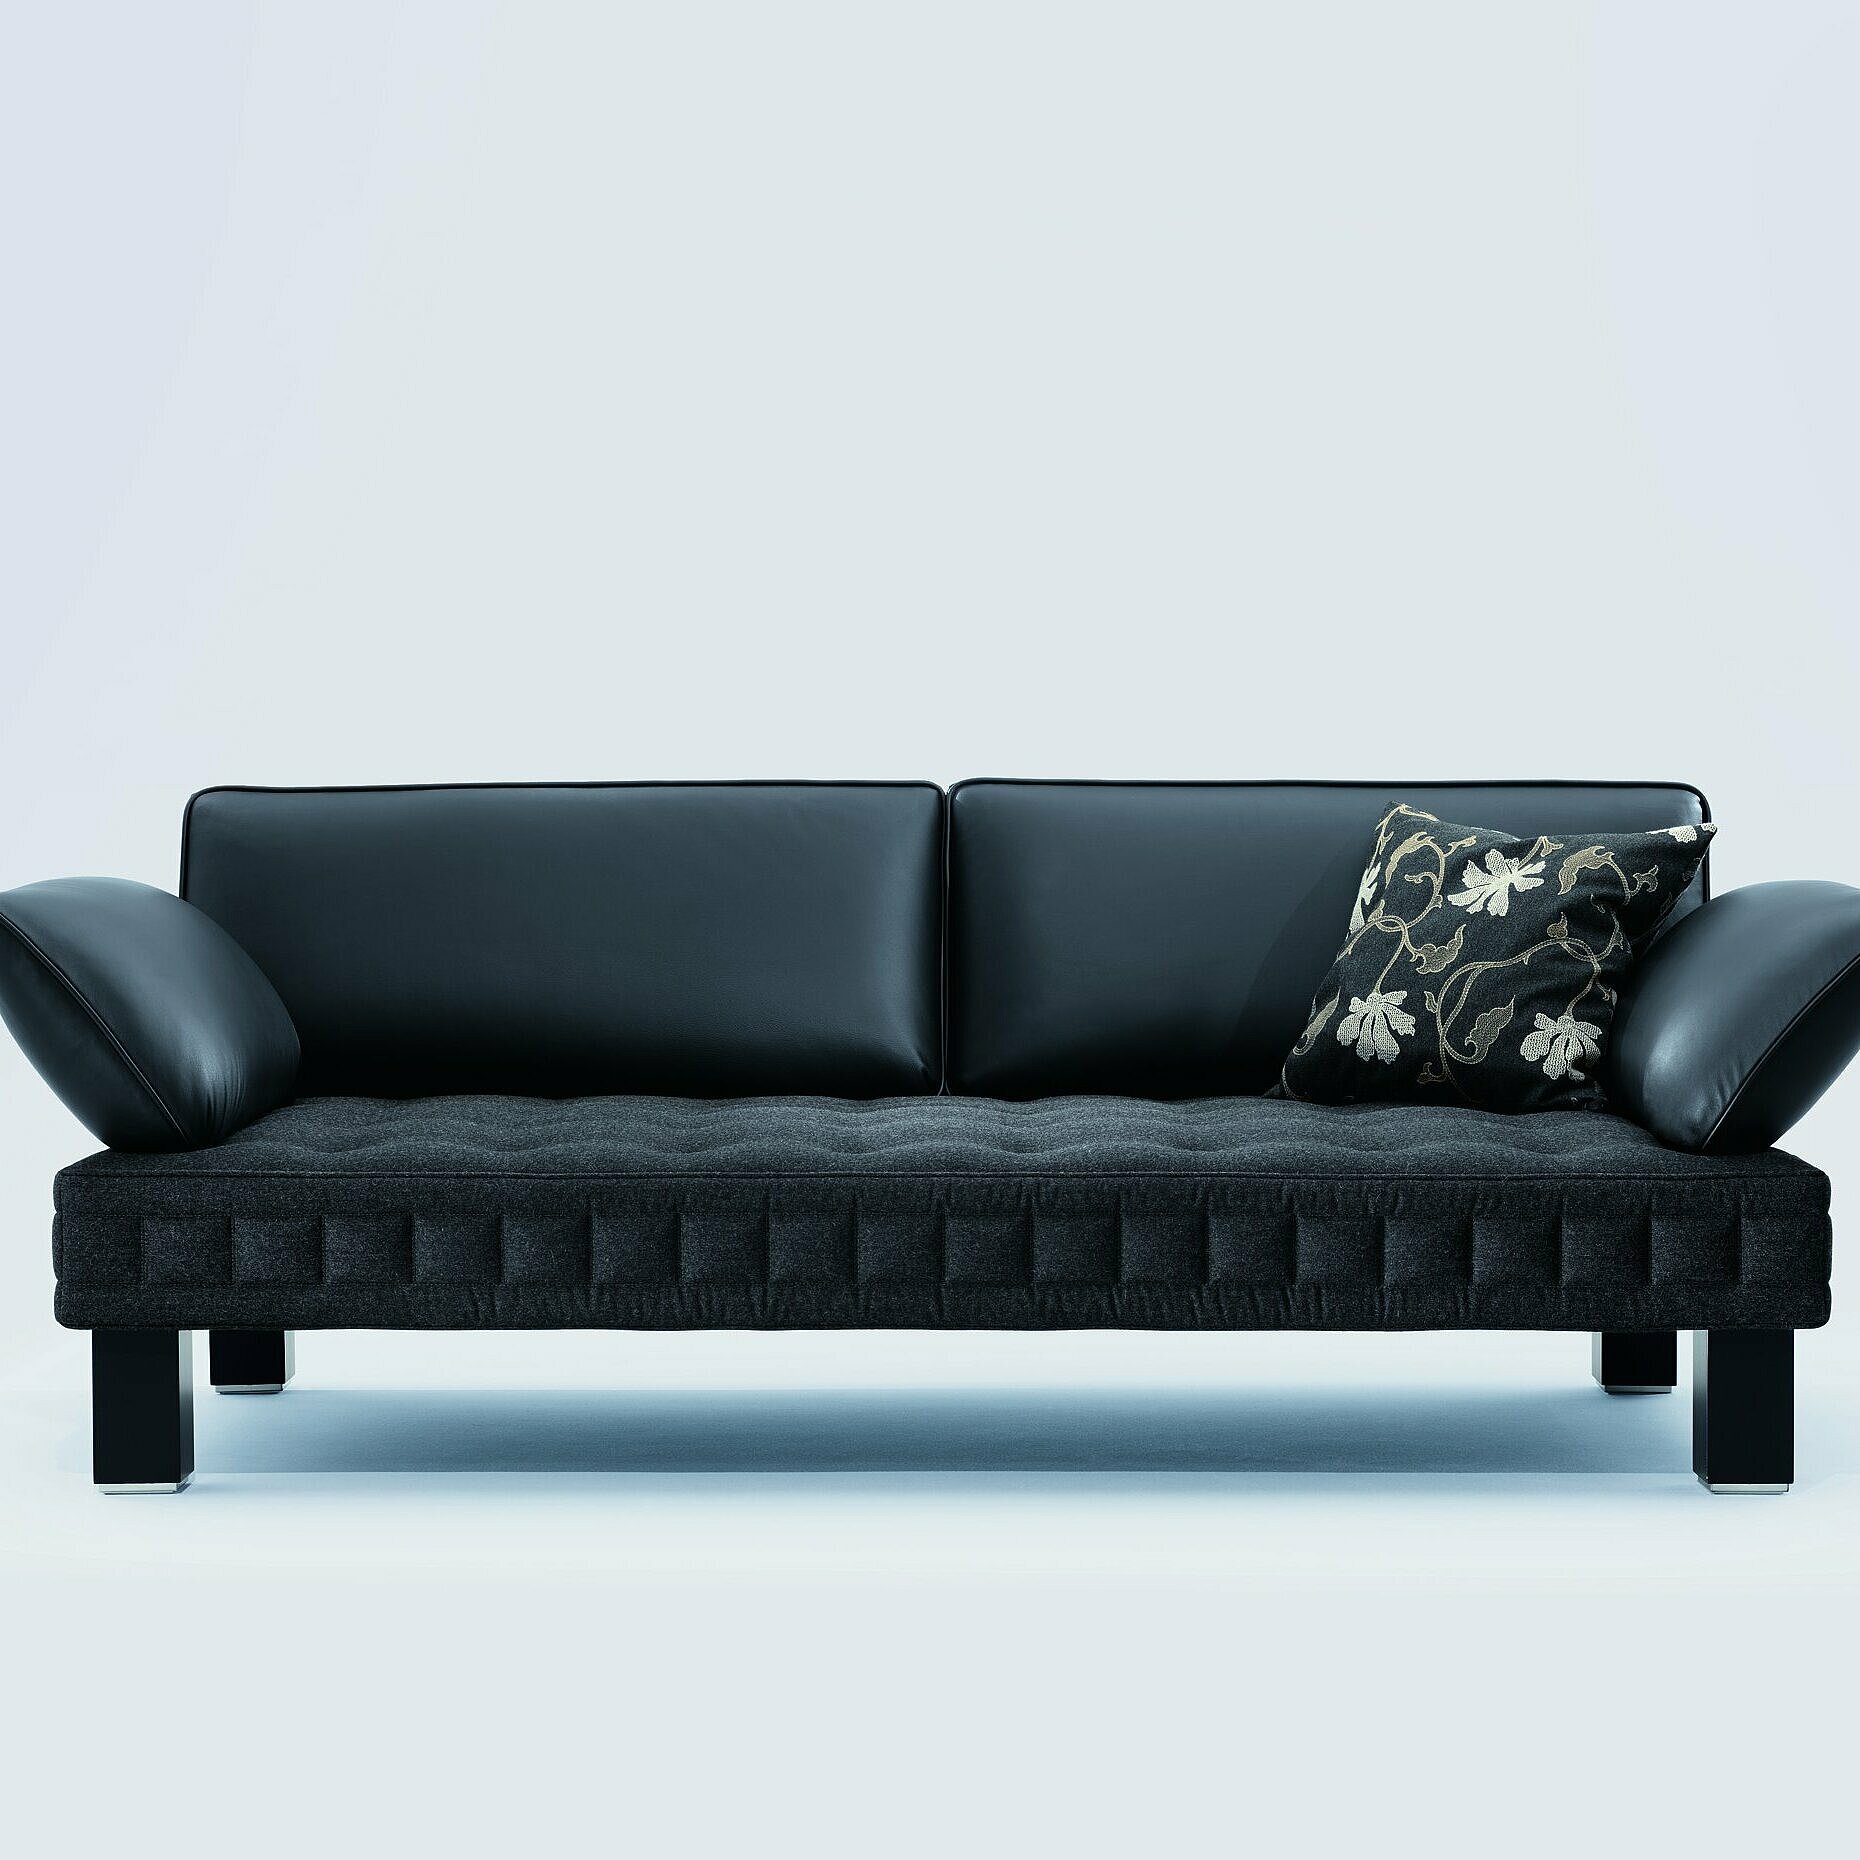 Materassi sofa in two different cover options, leather and fabric 